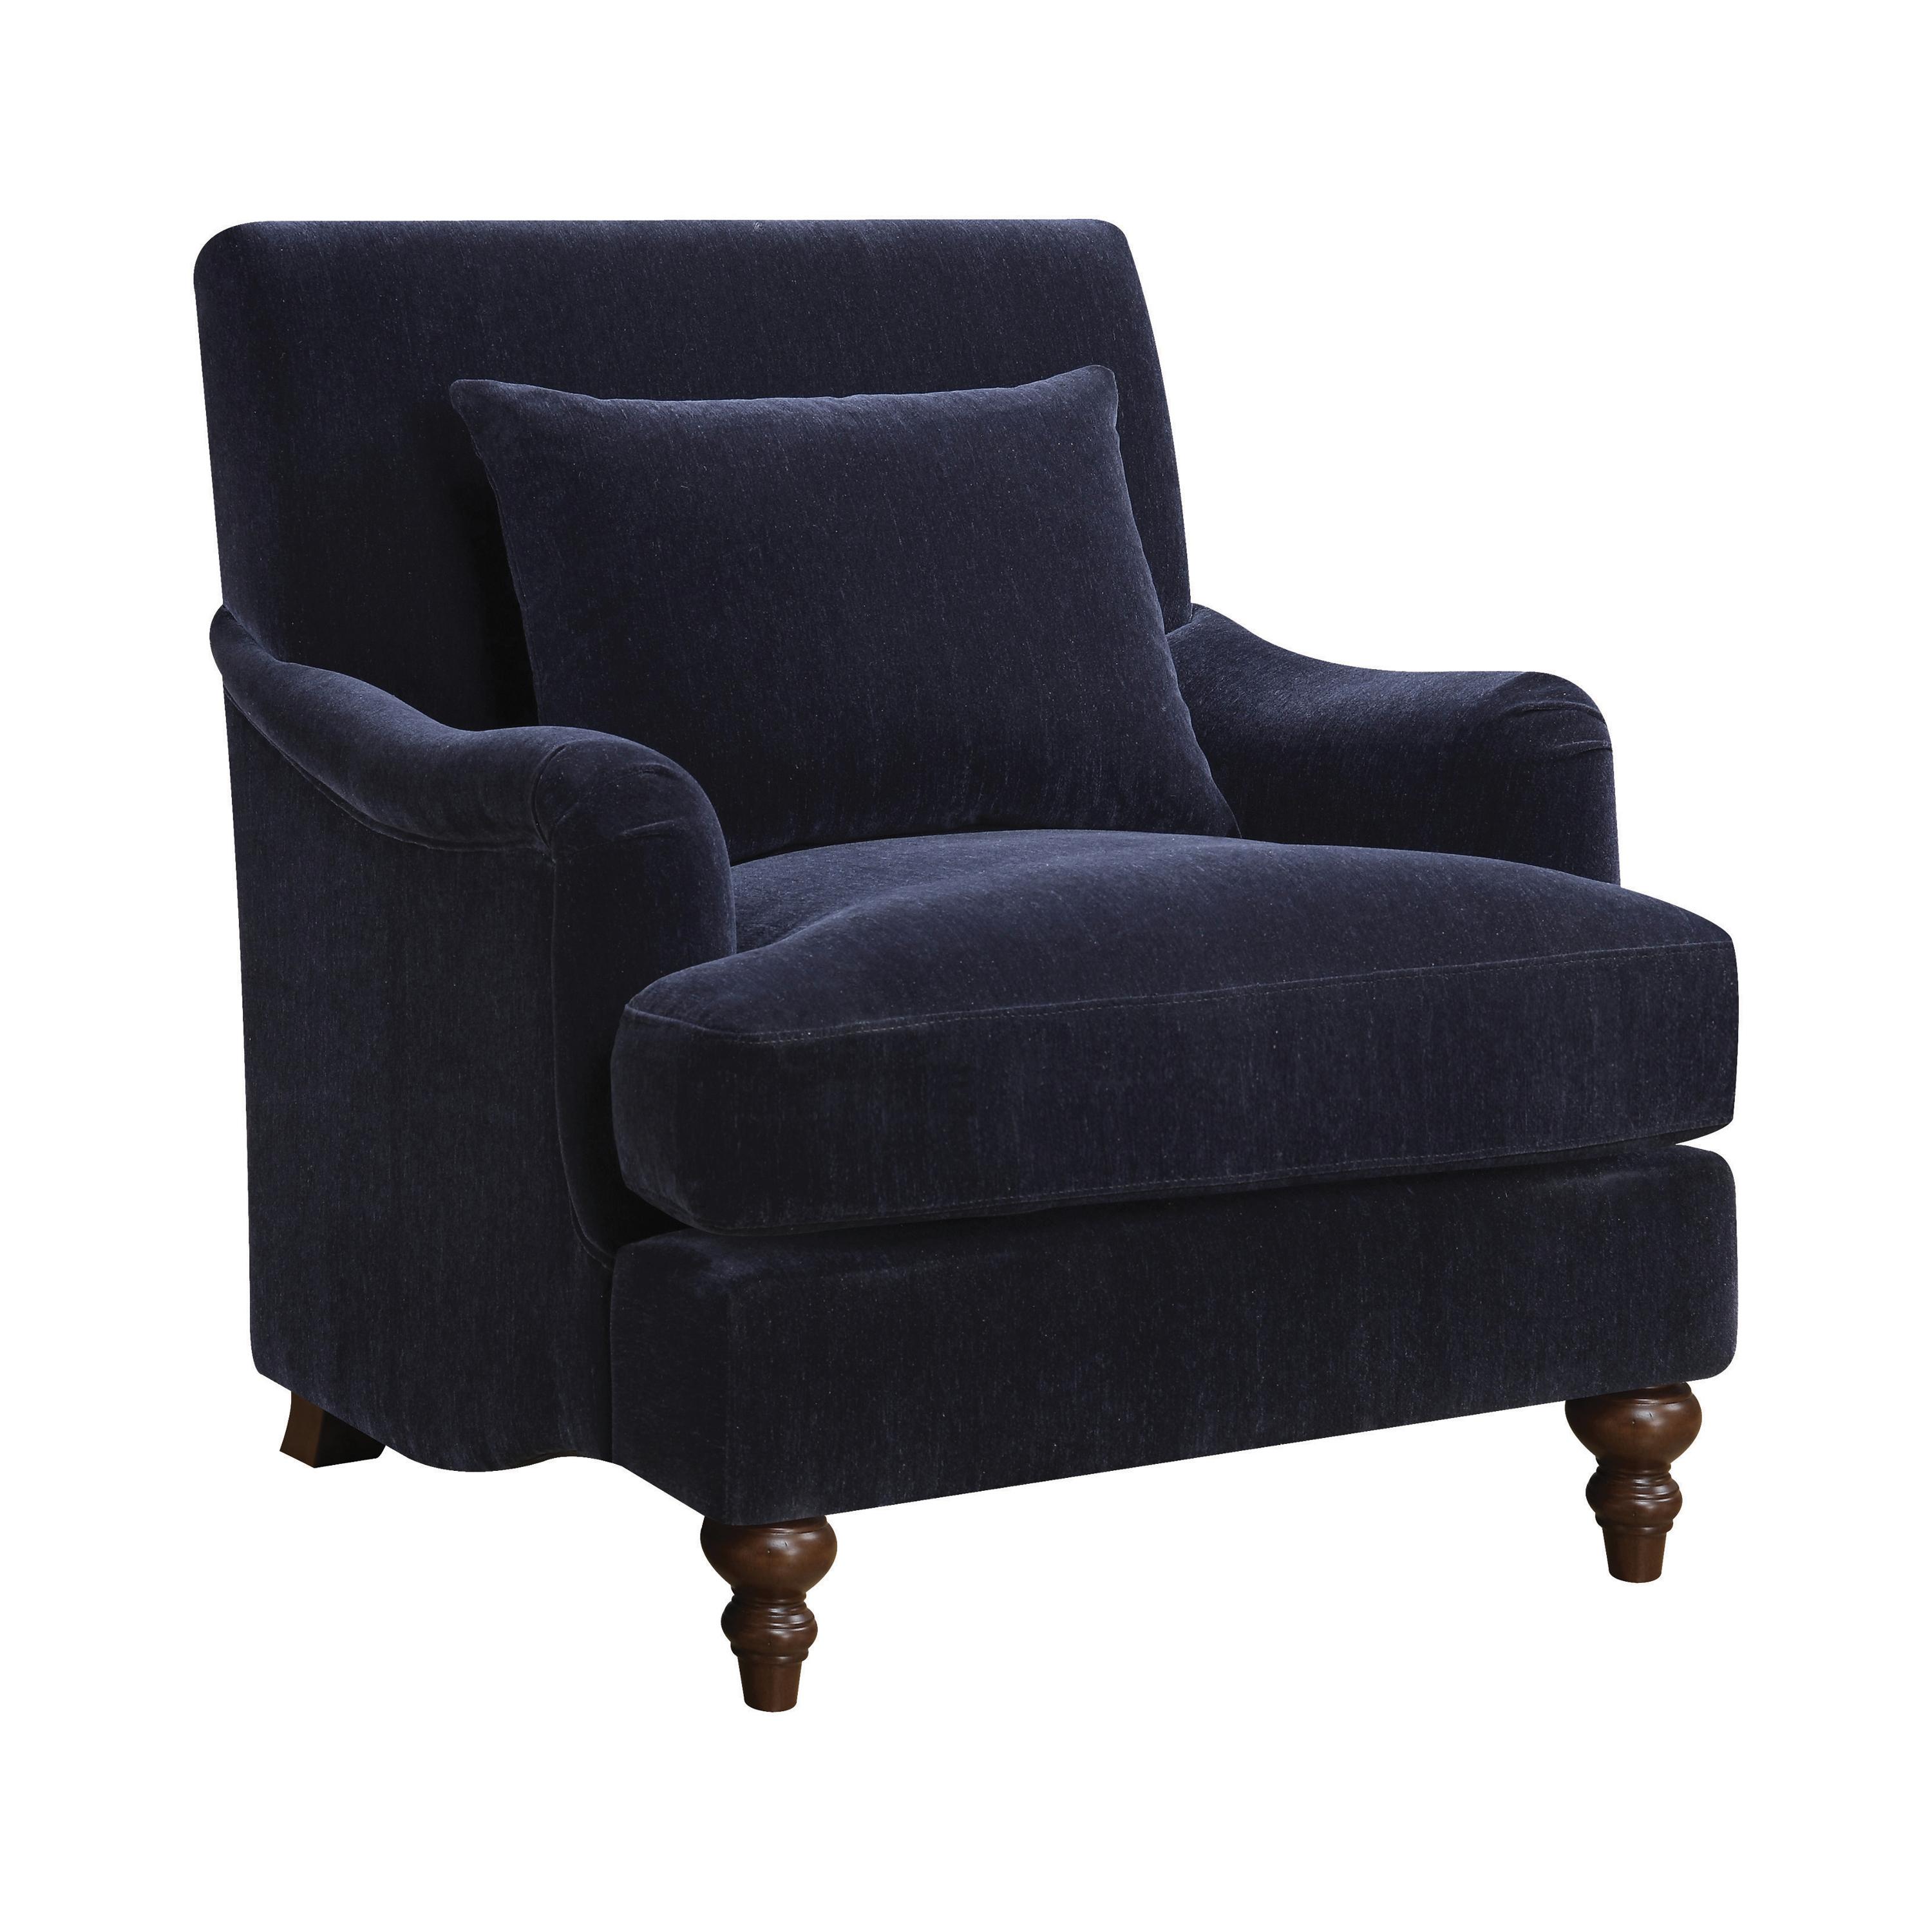 Contemporary Accent Chair 902899 902899 in Blue Velvet